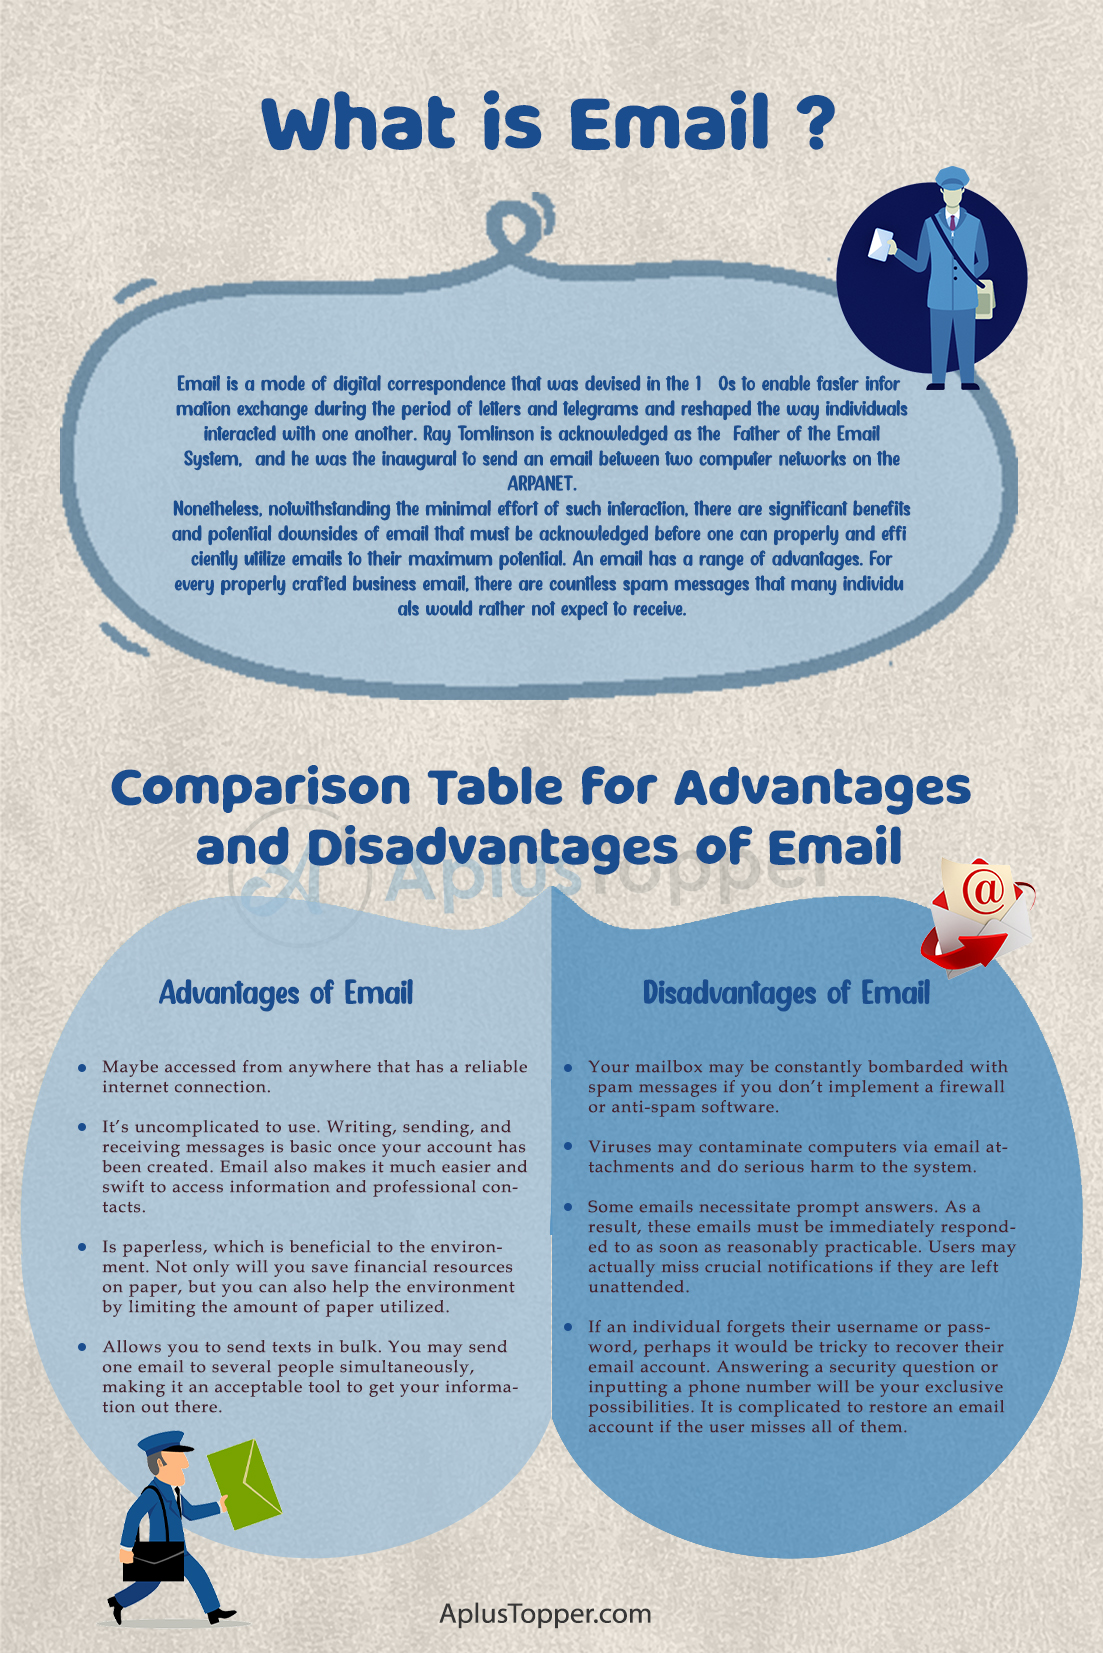 What and what is the most important advantage of email?